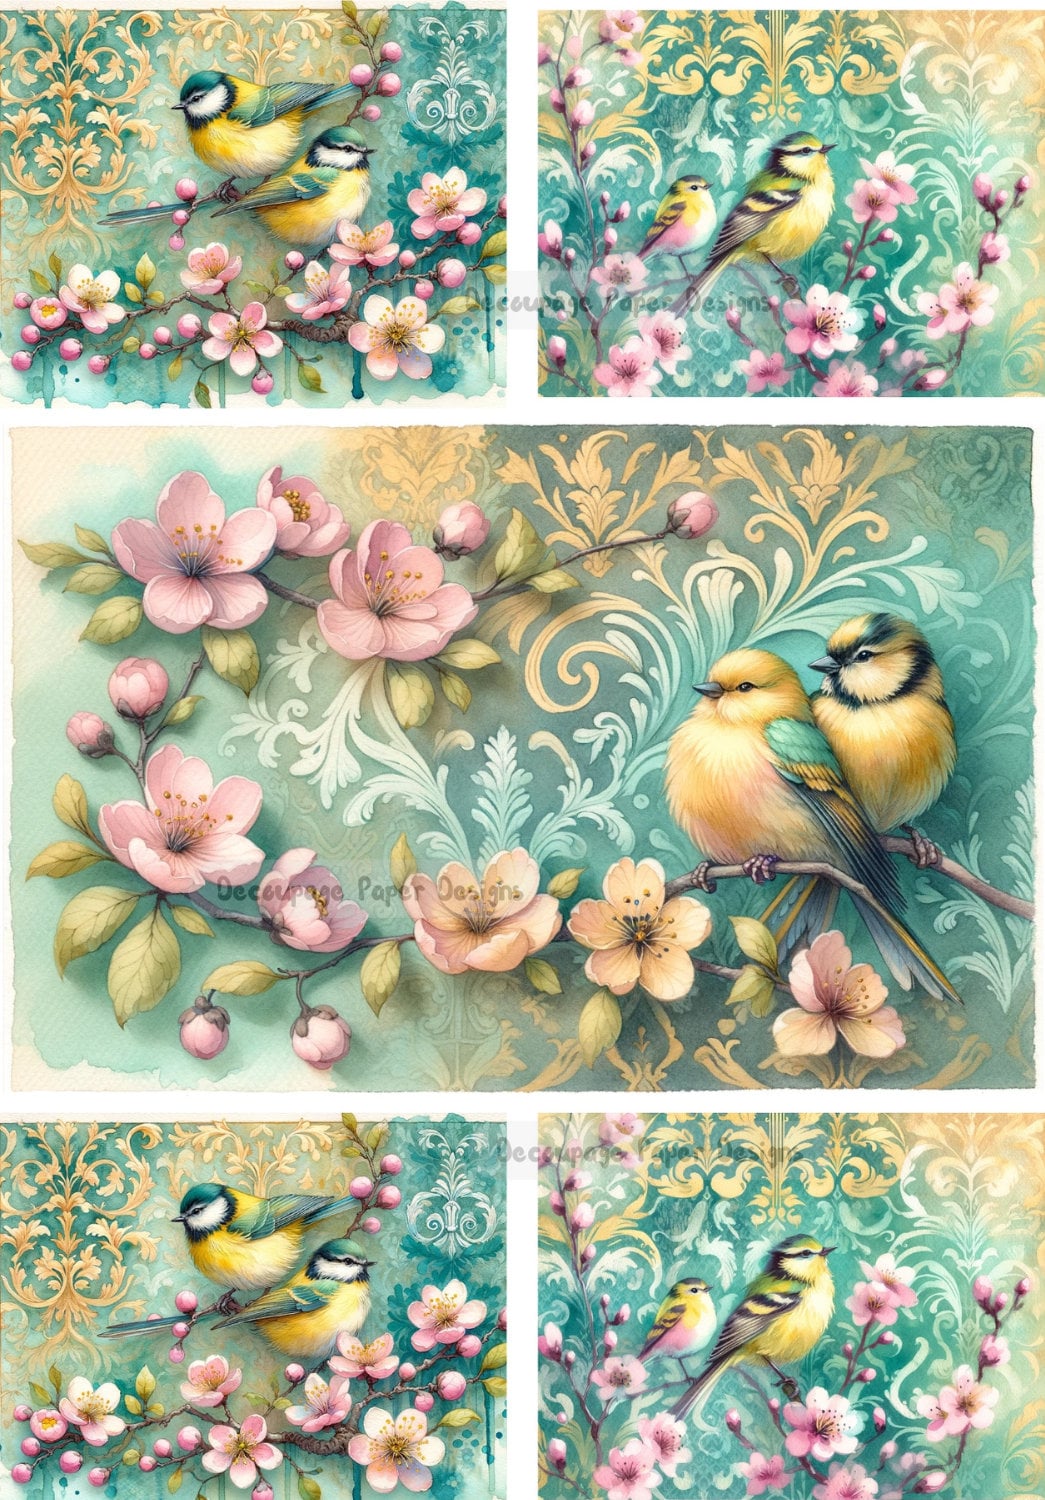 Decoupage Creatives, Rice Paper,  Mixed Media, Spring, Birds, Flourishes, Shabby Chic, Flowers, Squares A4 8.27 X 11.69, DPD-300